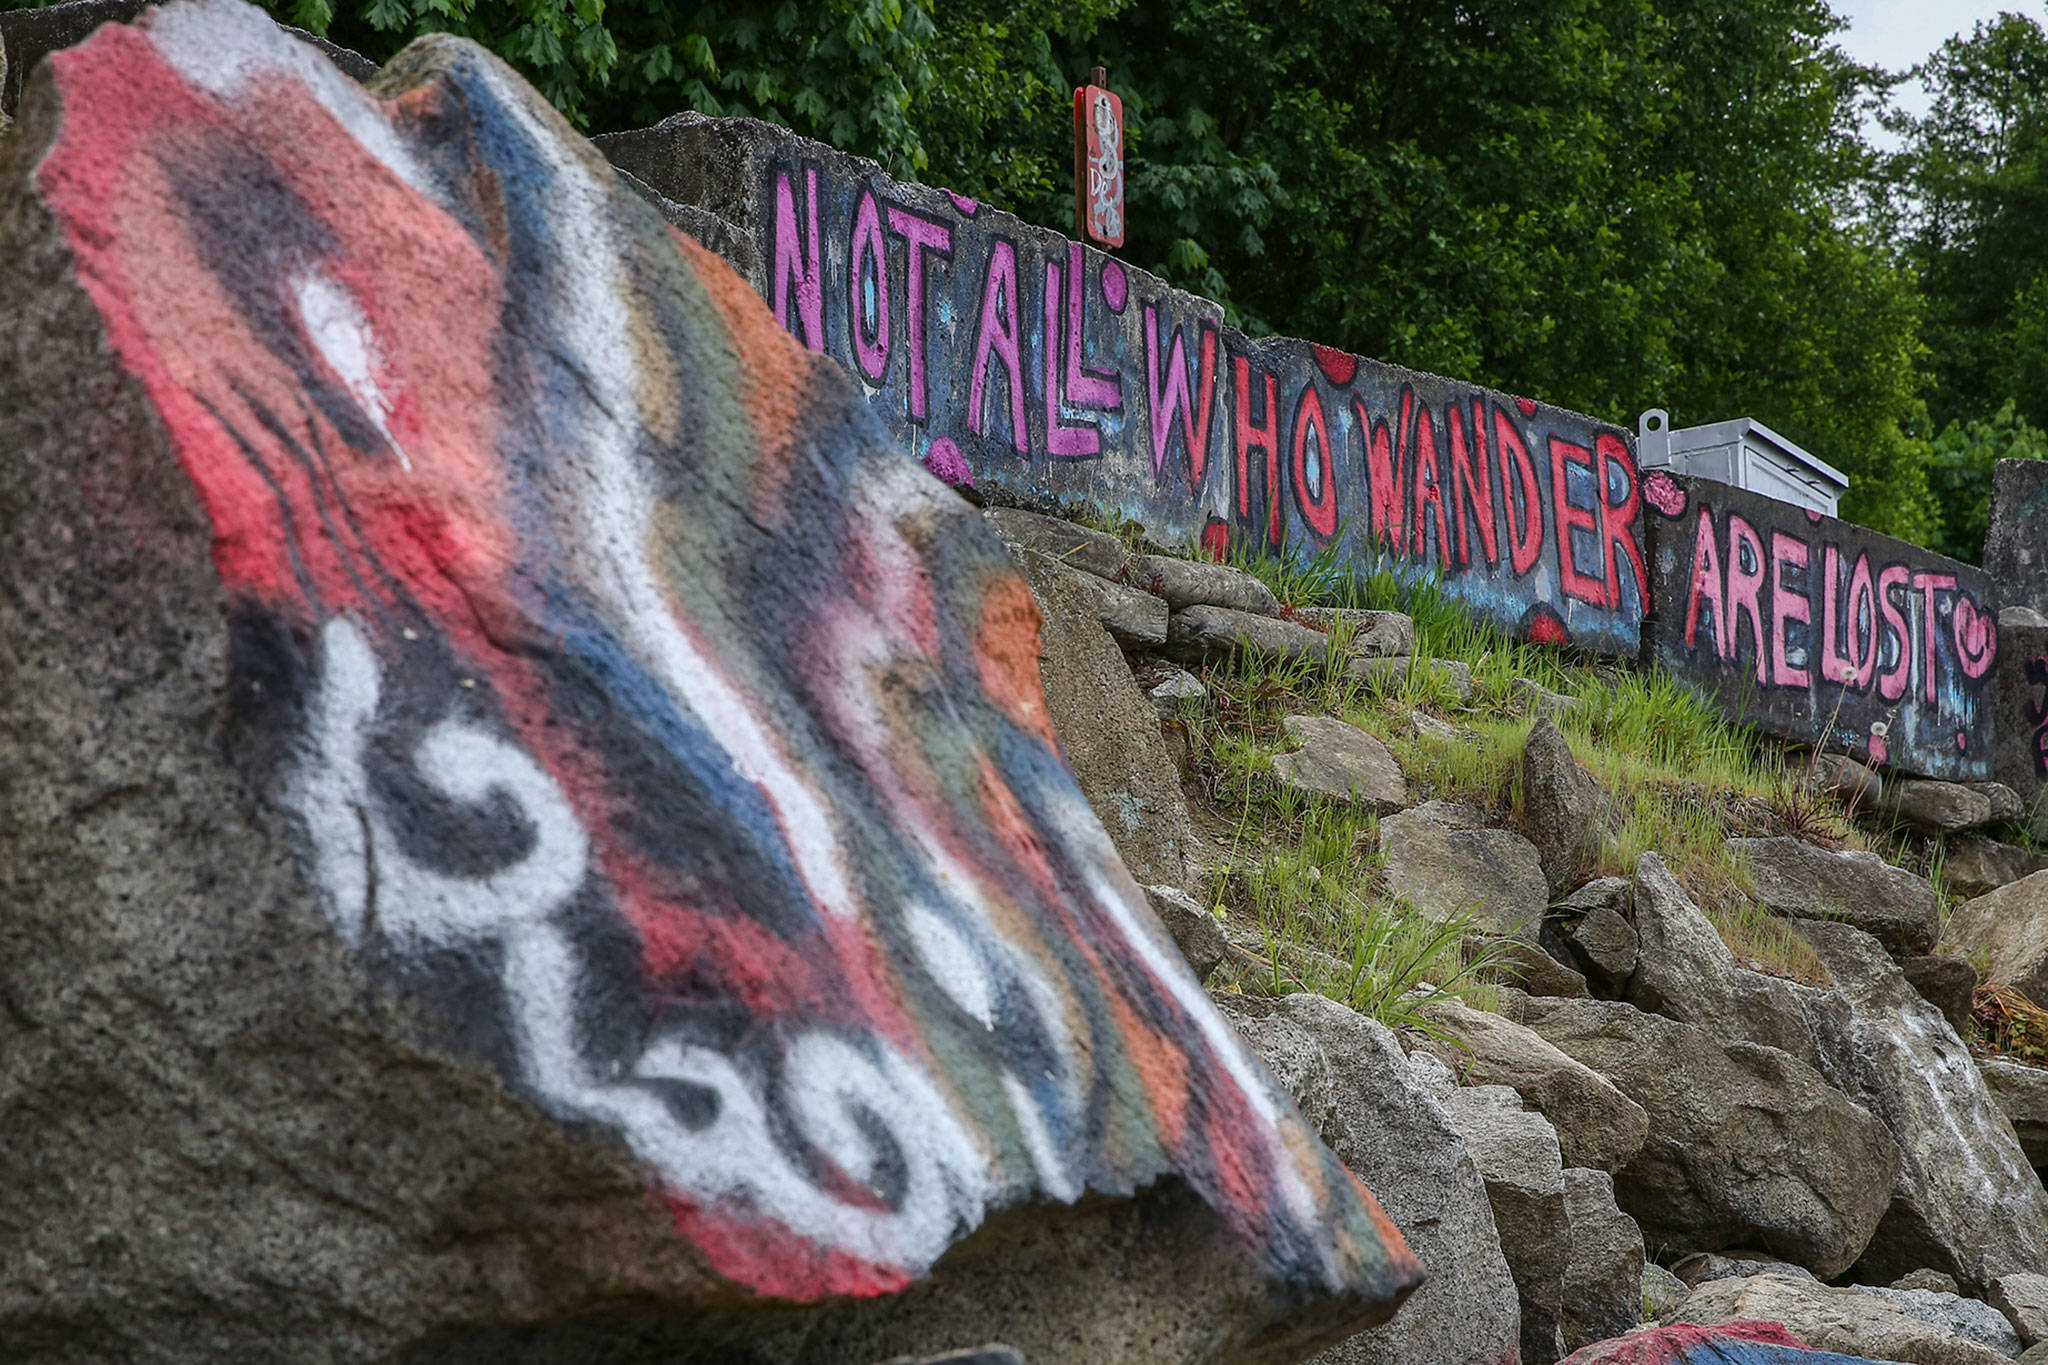 Howarth Park in Everett has had an increase in graffiti on the long stretch of boulders and concrete barriers between the shore and railroad tracks. (Kevin Clark / The Herald)